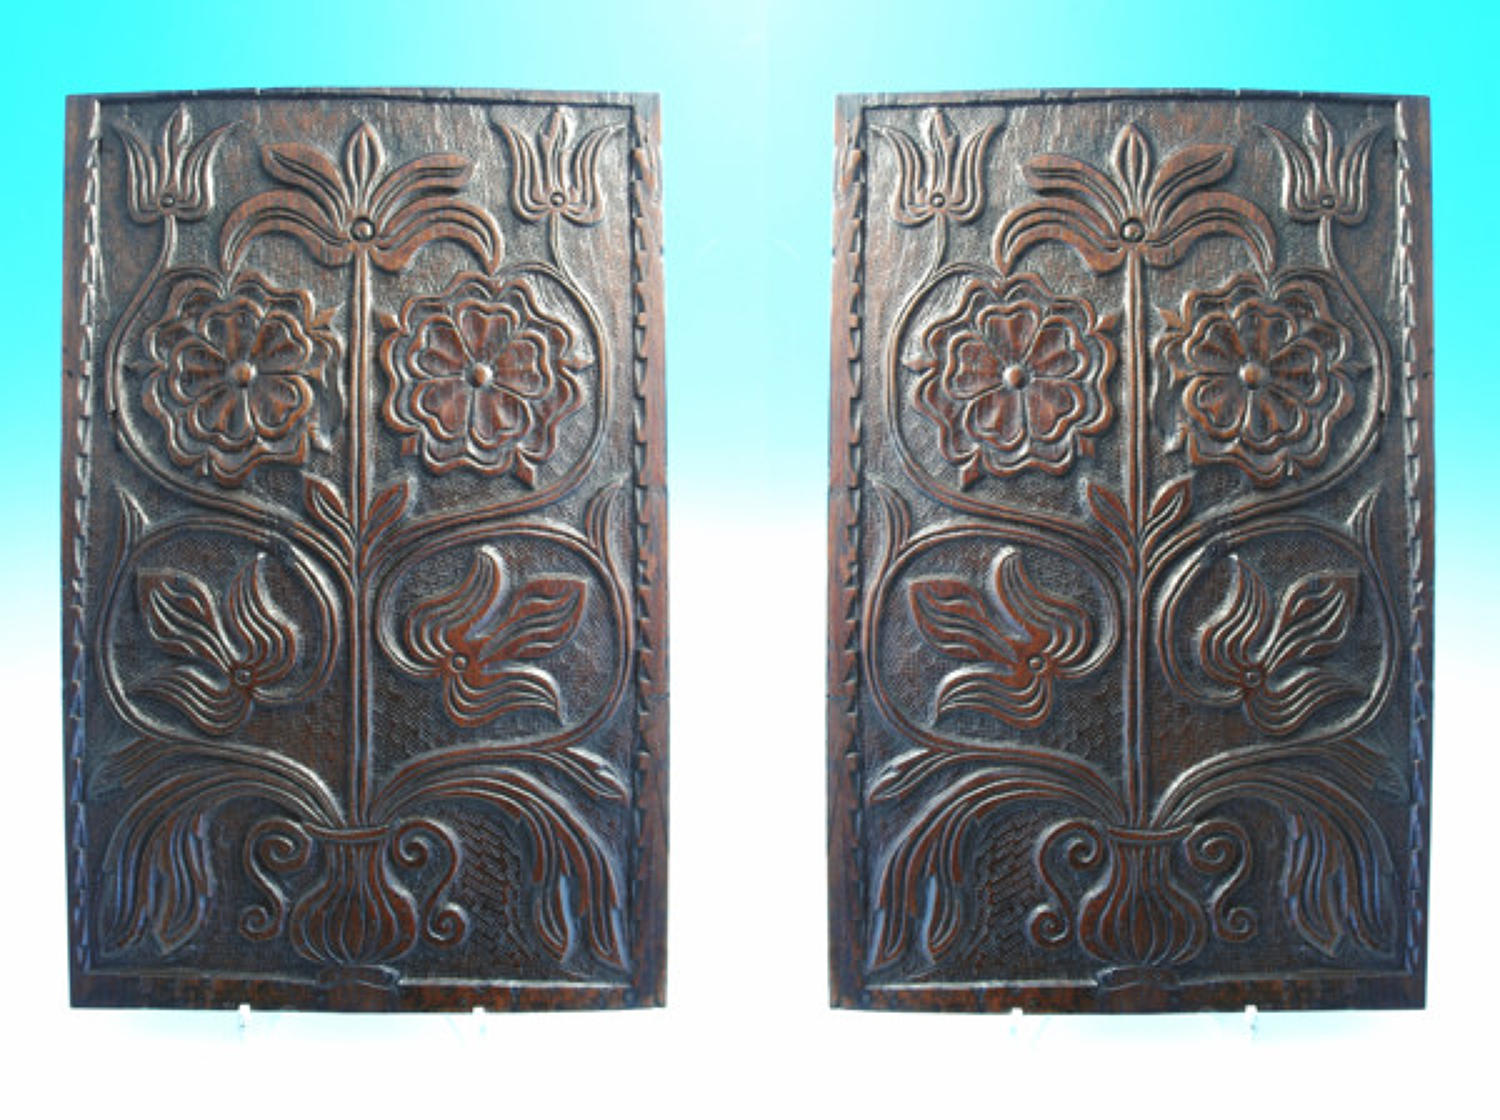 A fine pair of 17thc carved Oak panels. English C1860 - 80